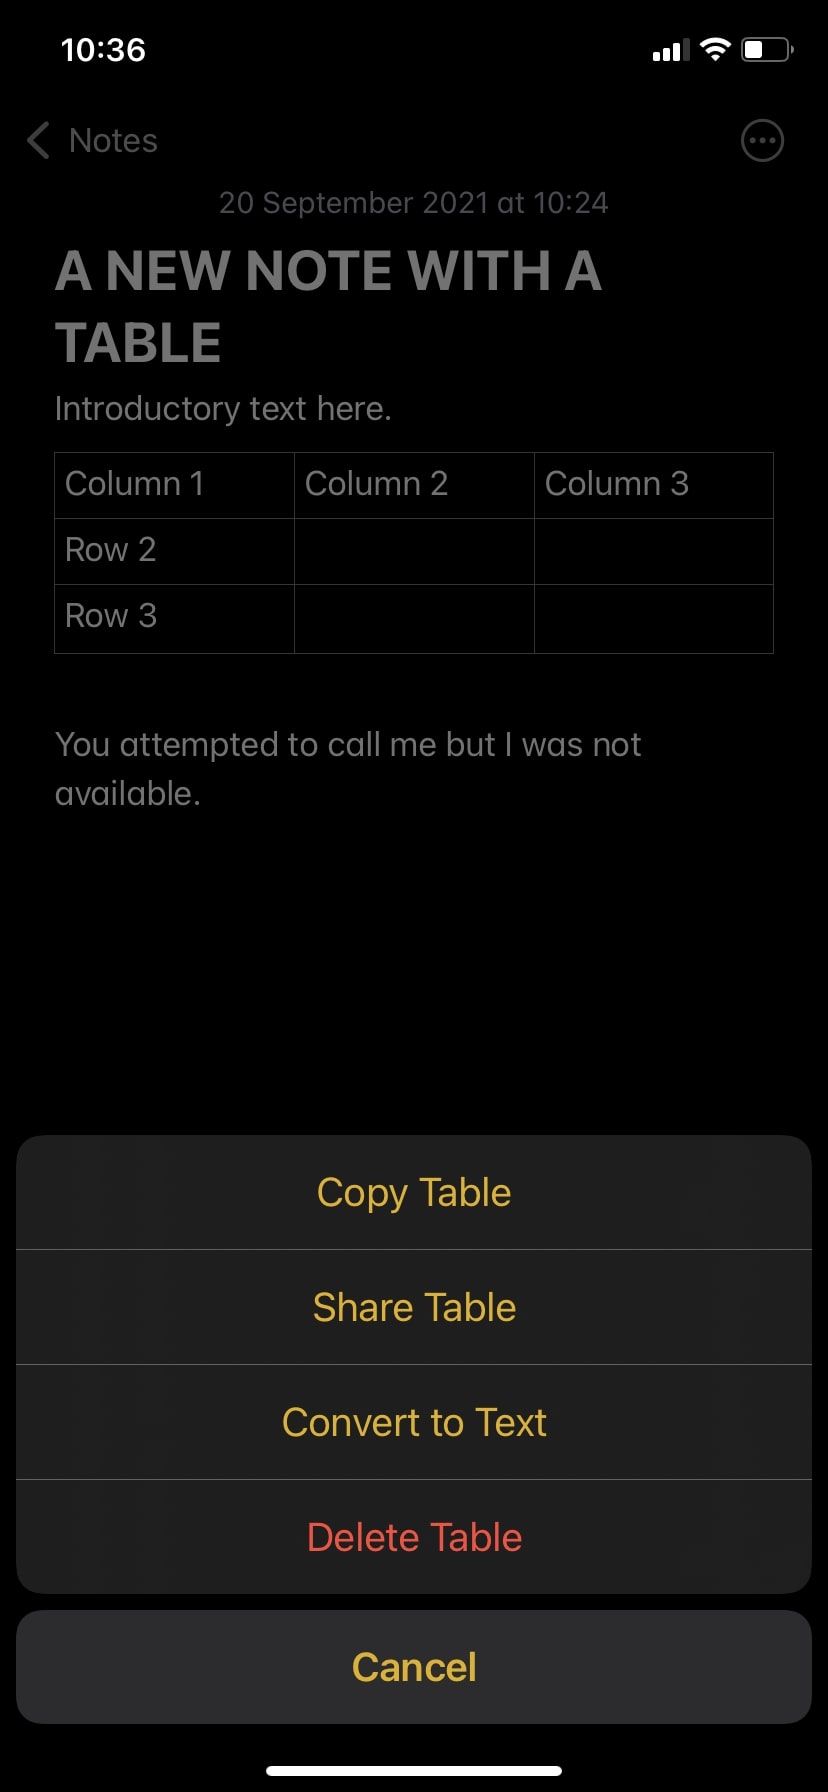 Pop-up menu to convert a table to text in Apple Notes